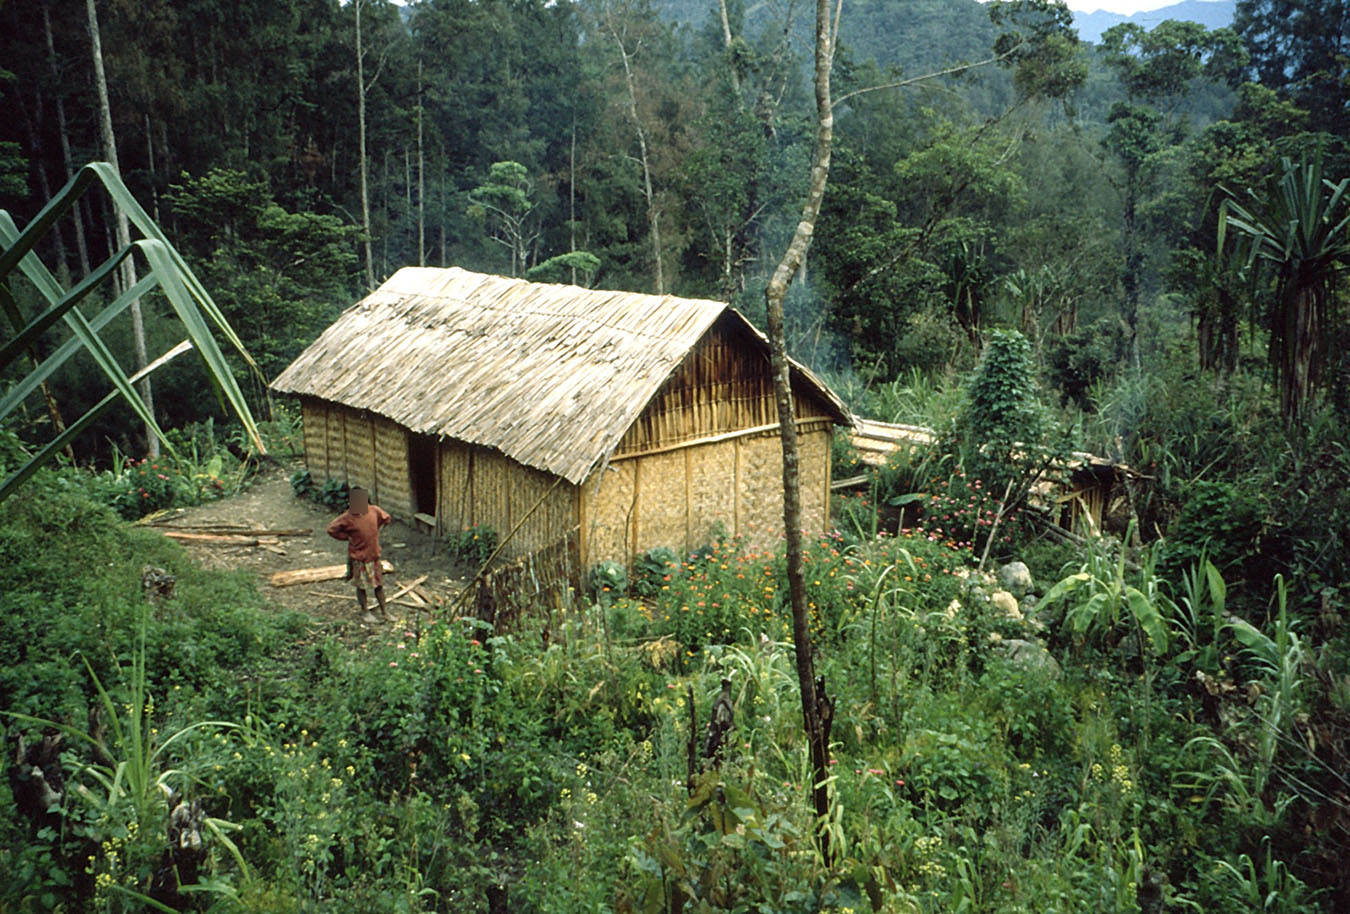 A homestead in the Porgera Valley. Photo by Jerry K. Jacka.